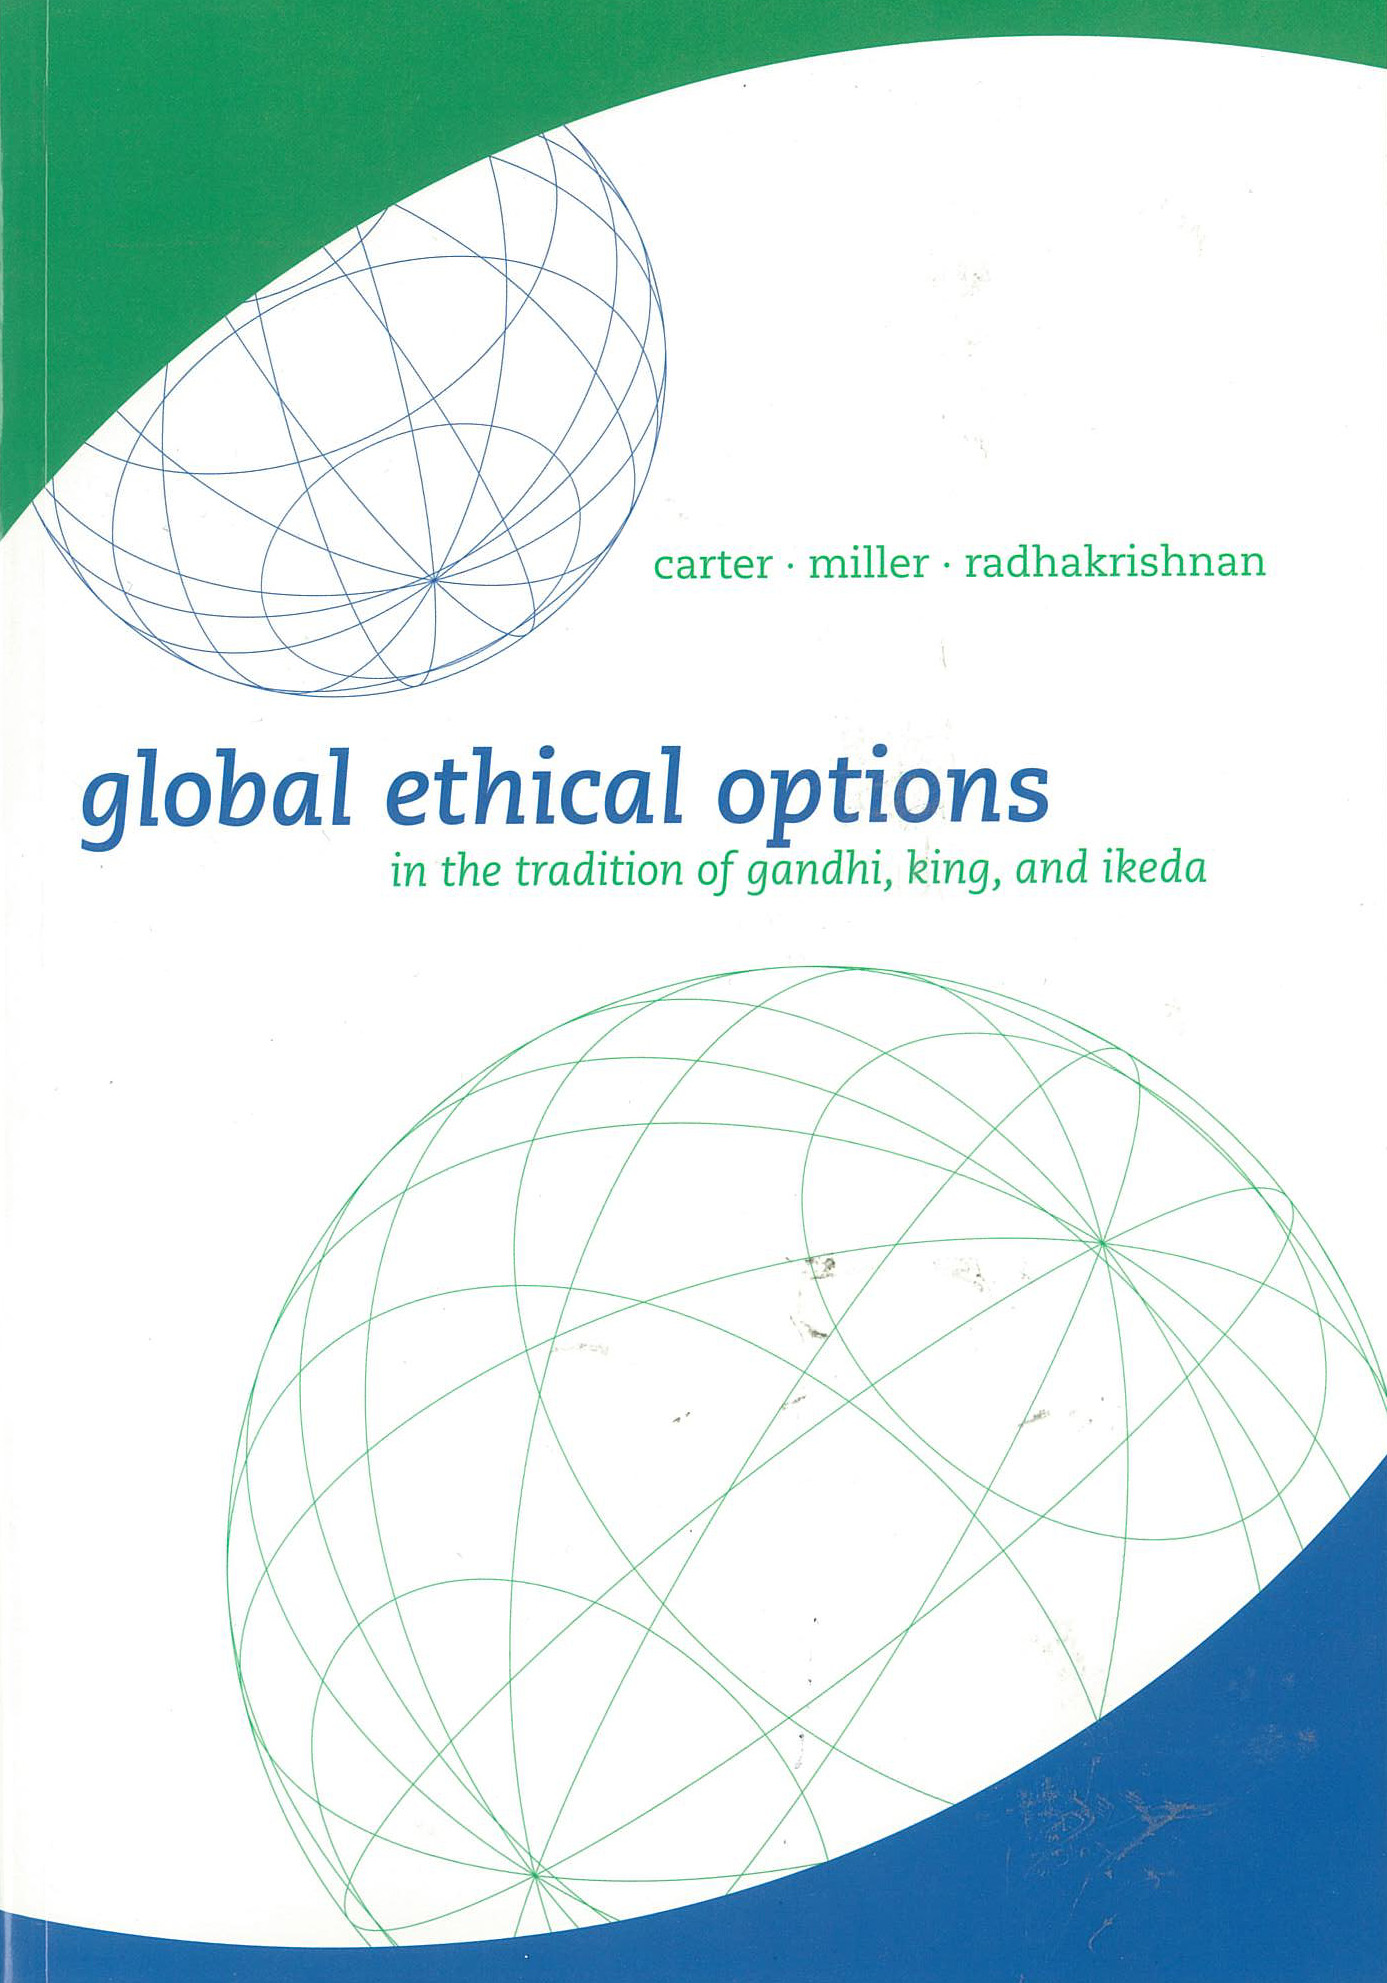 Global Ethical Options: In the tradition of Gandhi, King and Ikeda